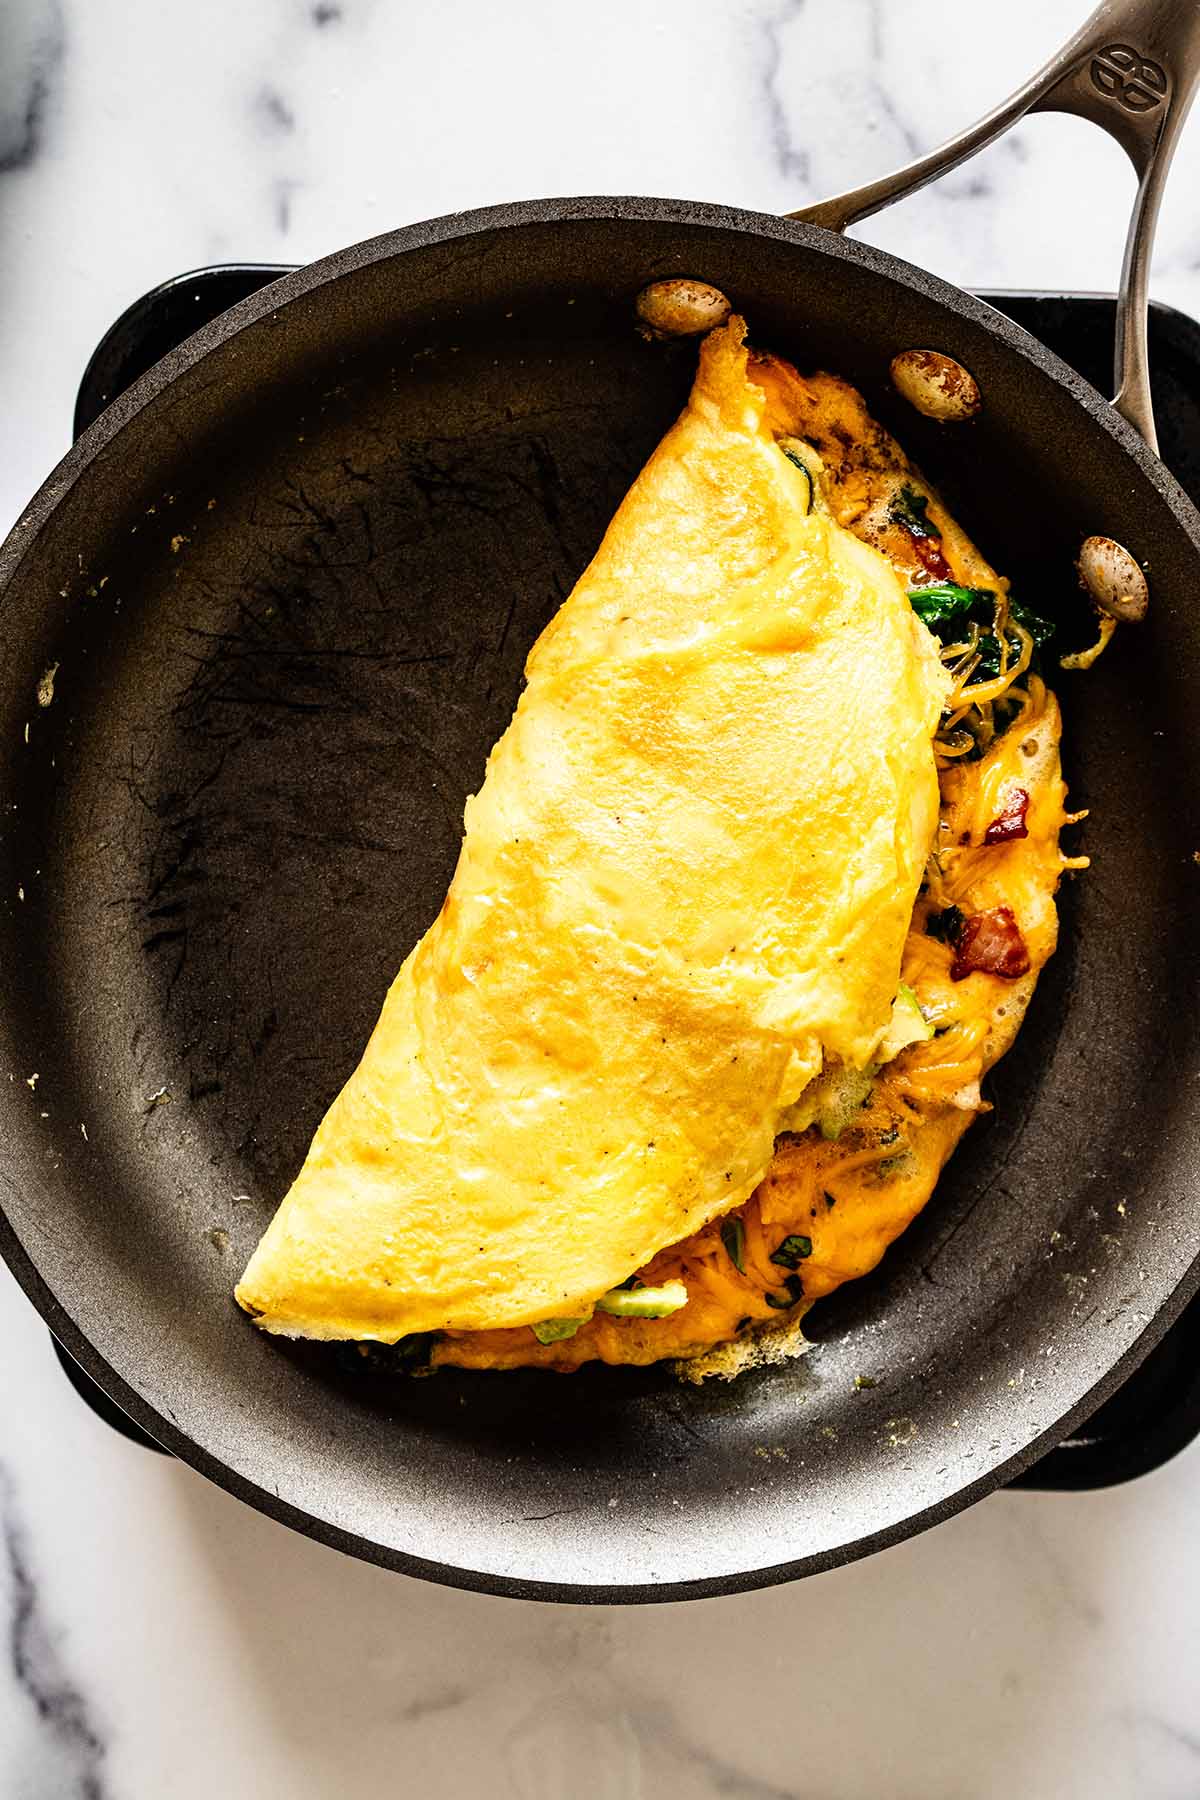 Keto omelette cooking in a skillet